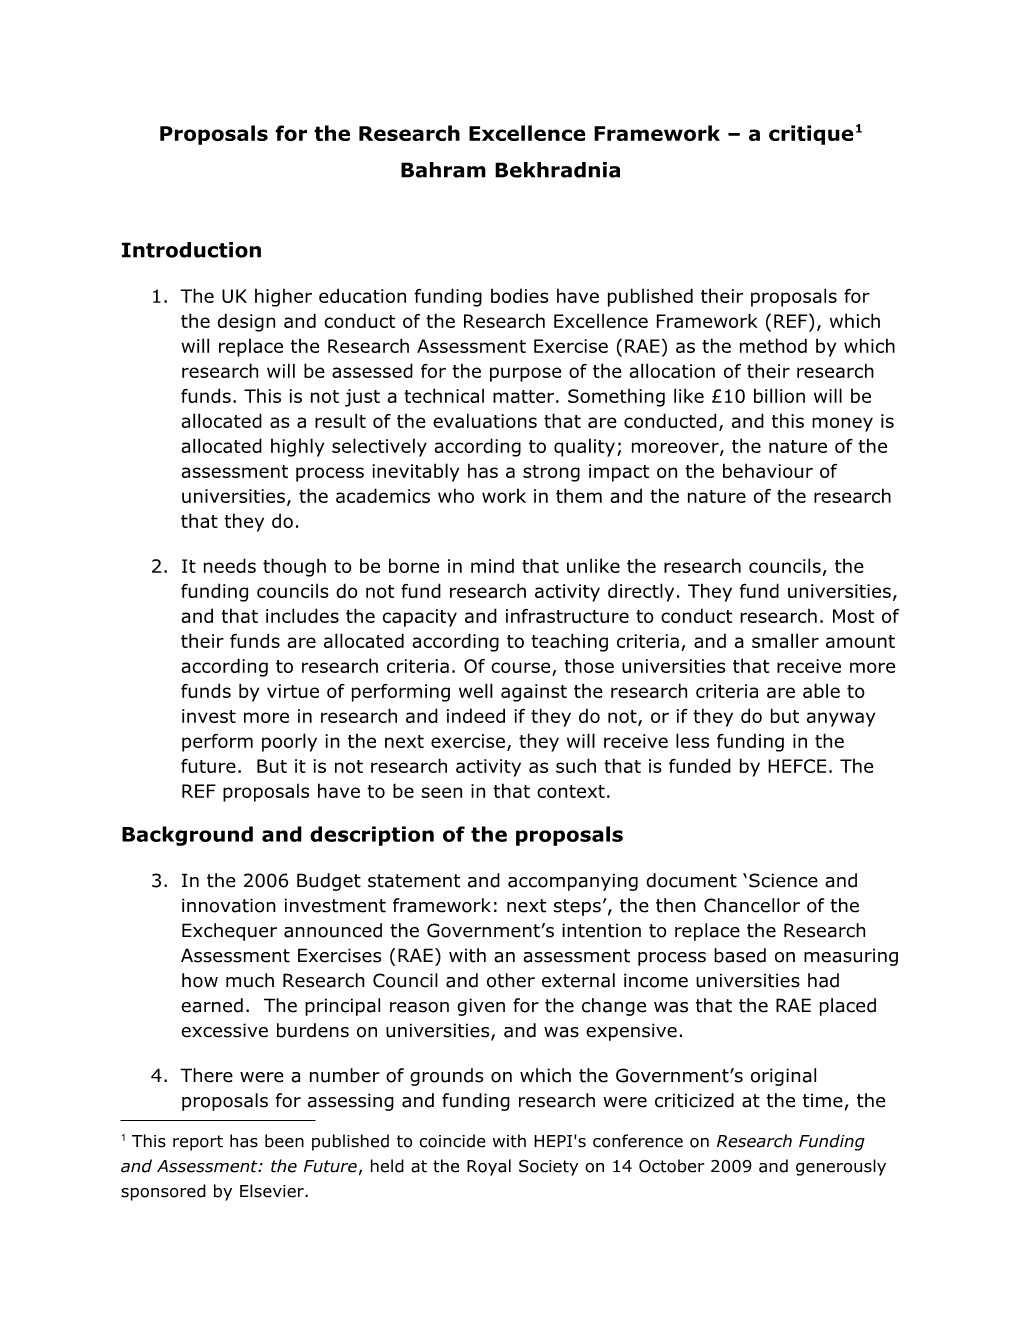 Proposals for the Research Excellence Framework a Critique 1